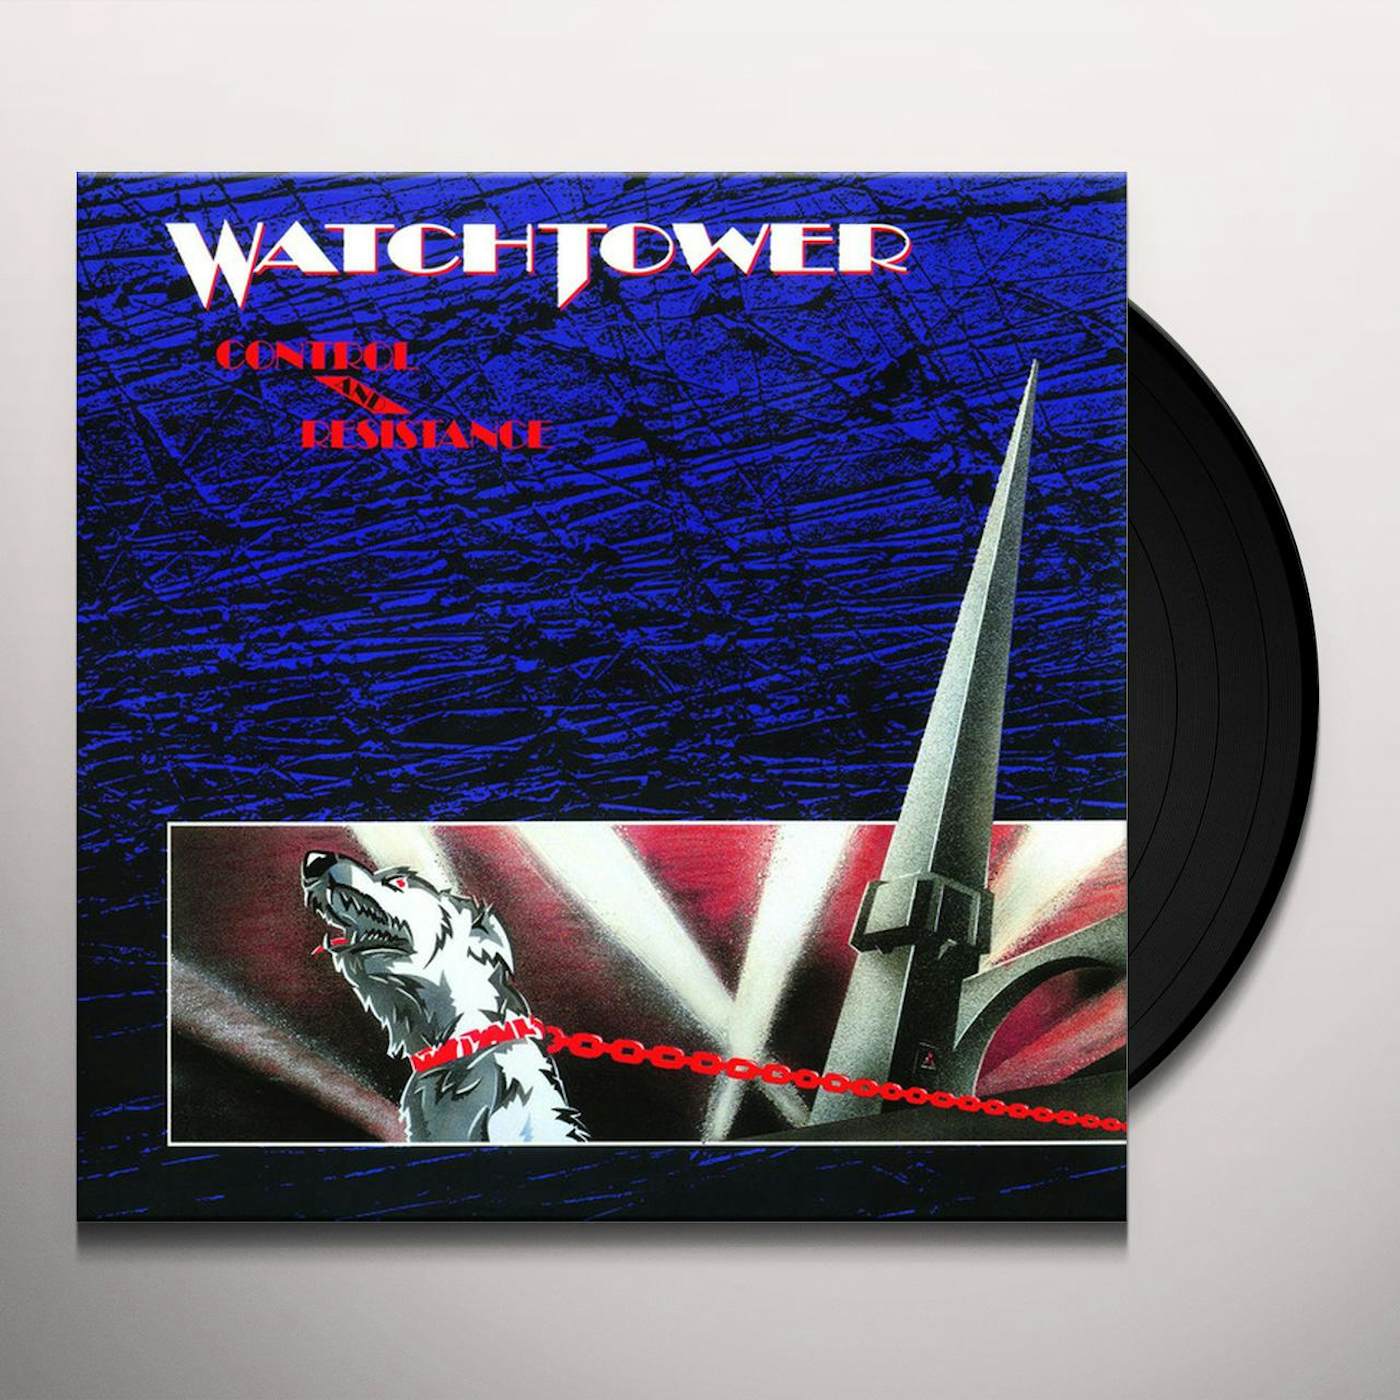 Watchtower Control and Resistance Vinyl Record